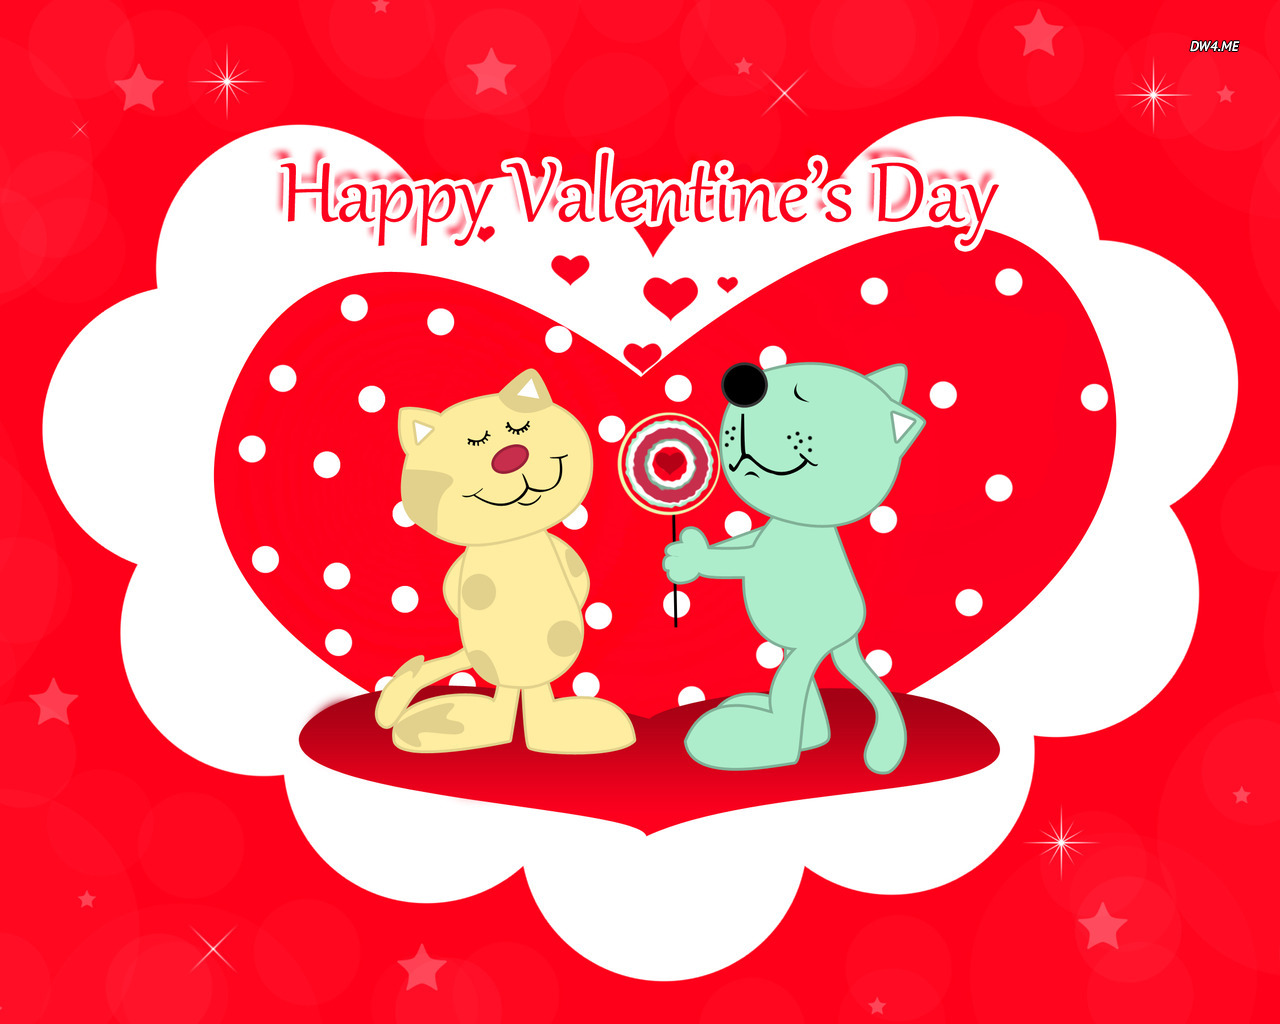 Happy Valentines Day wallpaper   Holiday wallpapers   1185